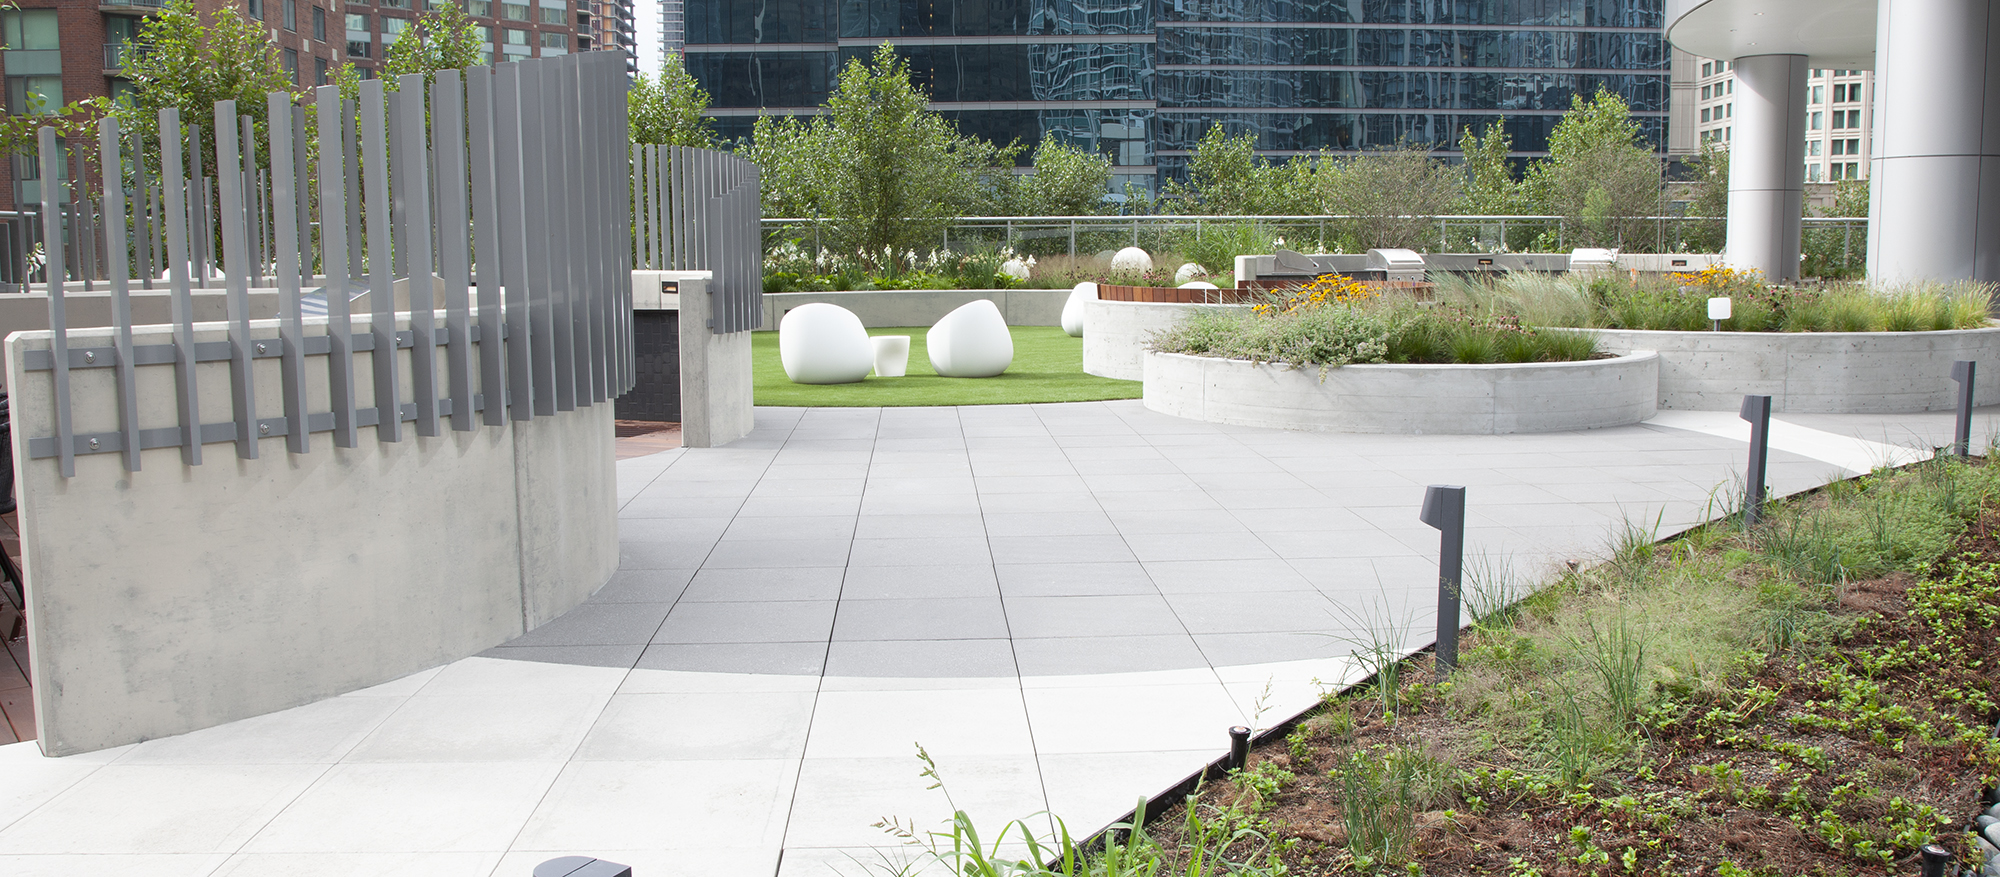 465 N Park Roof Deck in Chicago with circular gardens, Unilock Arcana slabs for the groundwork, and outdoor amenities.